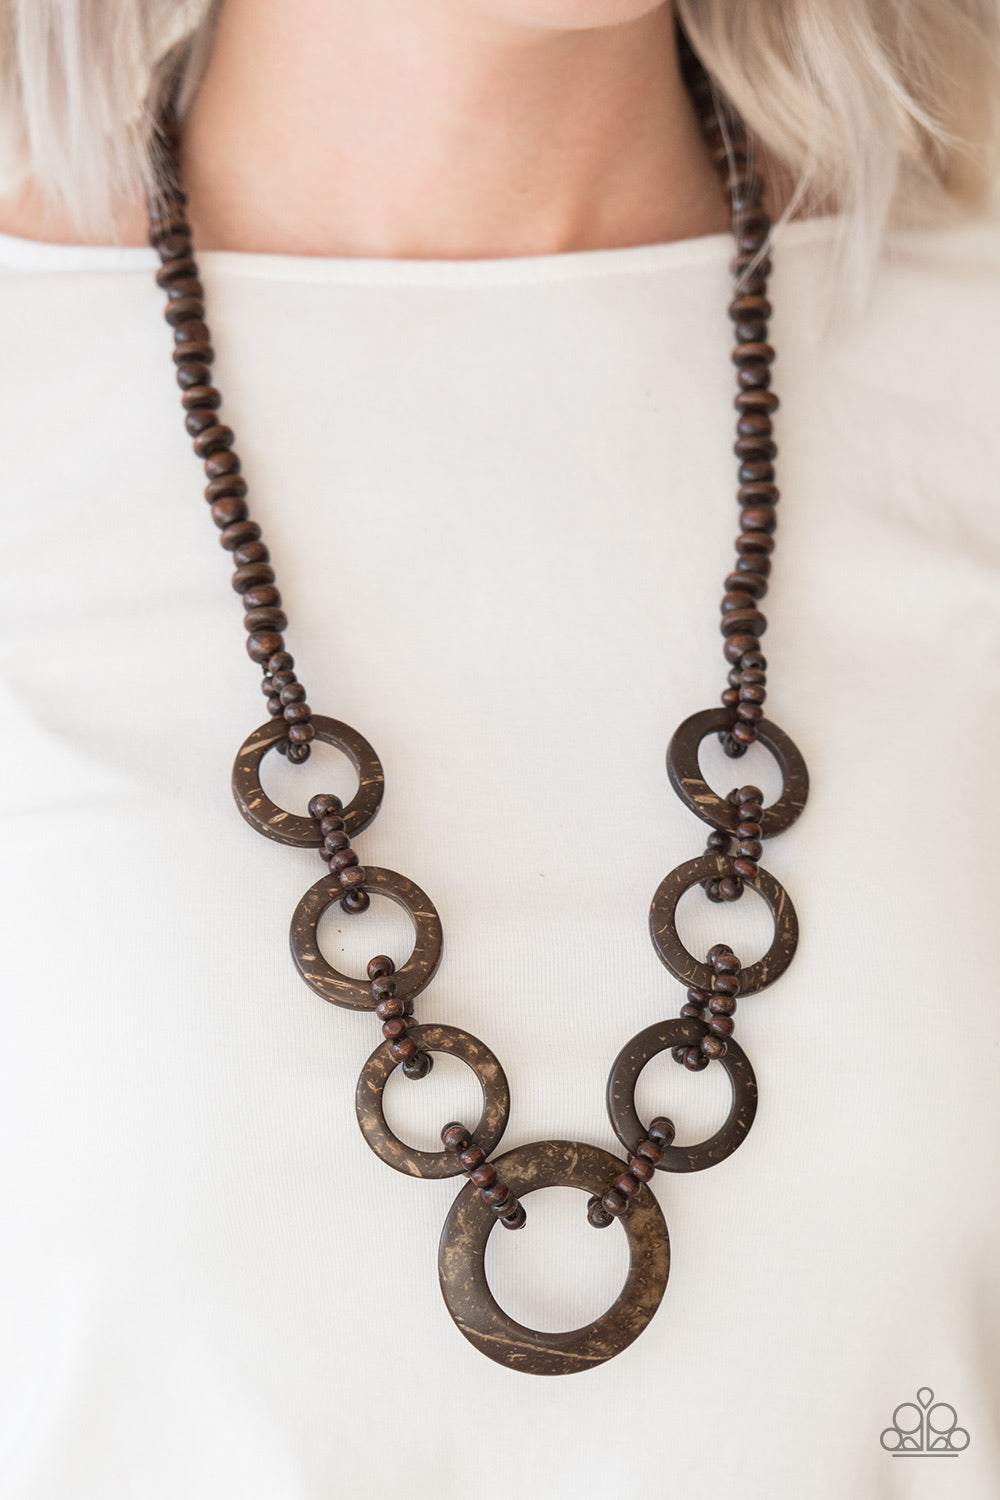 Paparazzi Accessories  - Endless Summer #N171 Box 11 - Brown Necklace